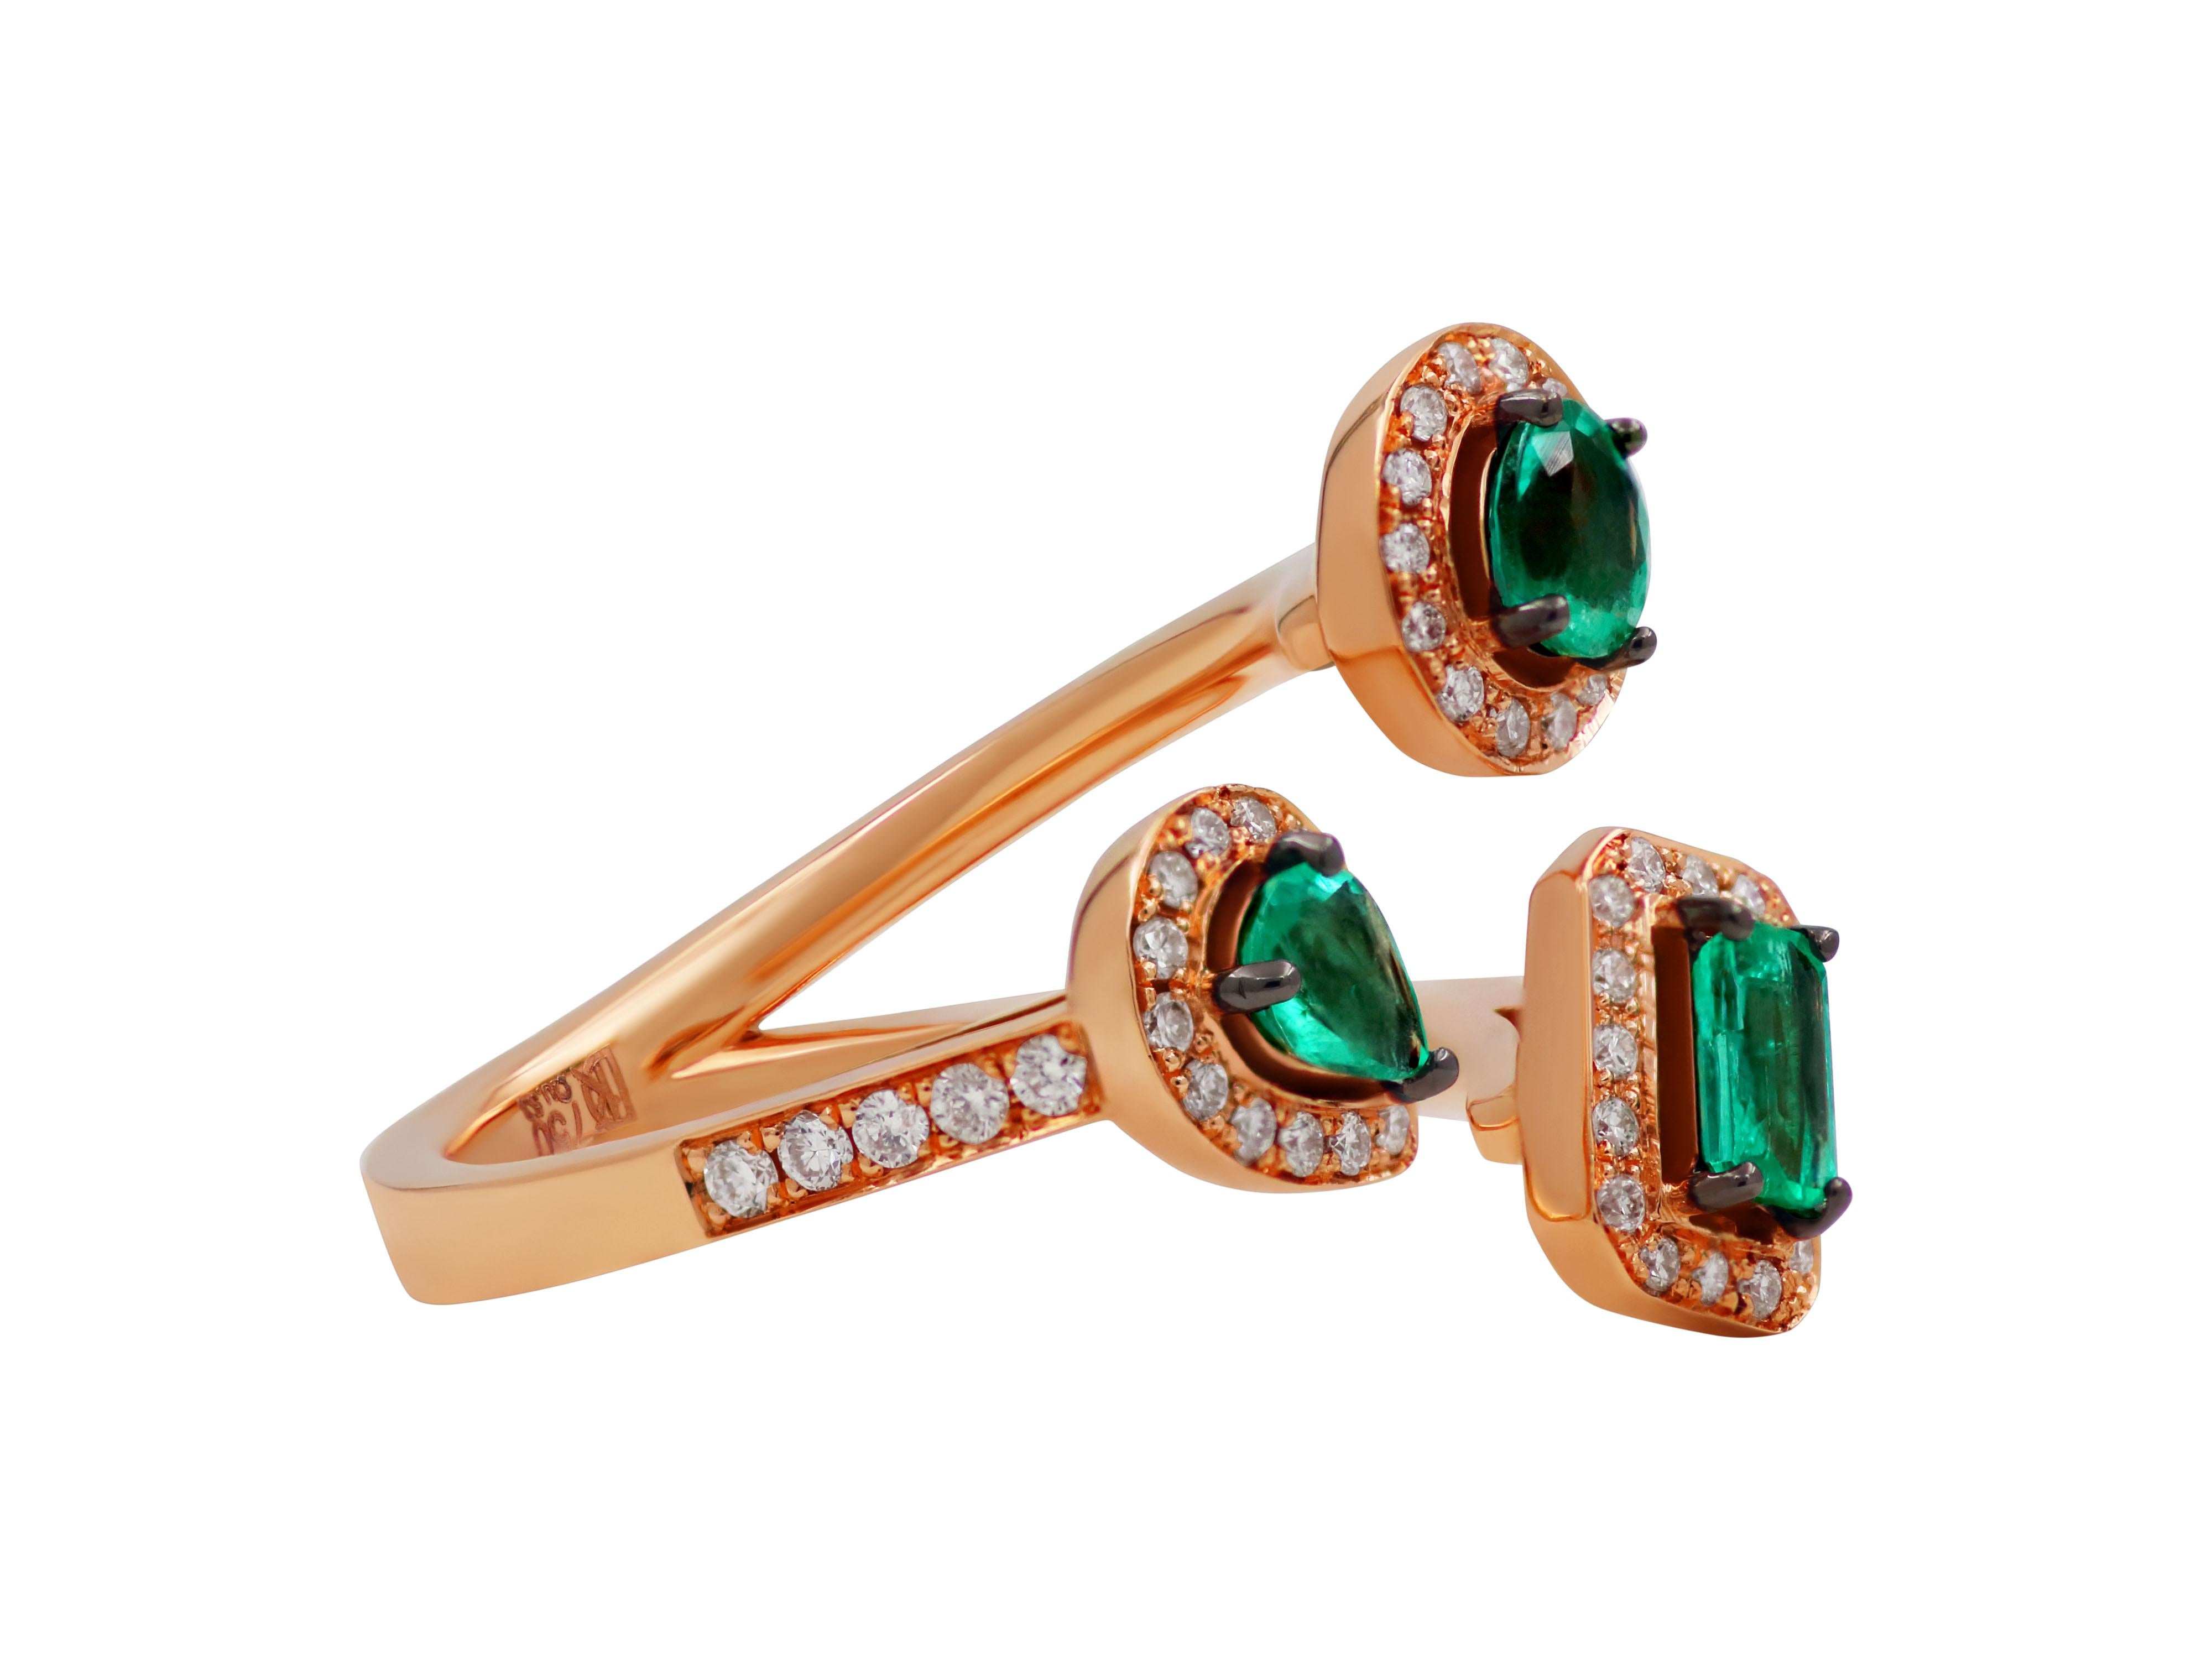 Triple ring in 18k rose gold with three 0.69 carats emeralds in different shapes and 0.37 carats brilliant cut diamonds. 

Ring face: 0.708X0.708”, 1.8X1.8cm